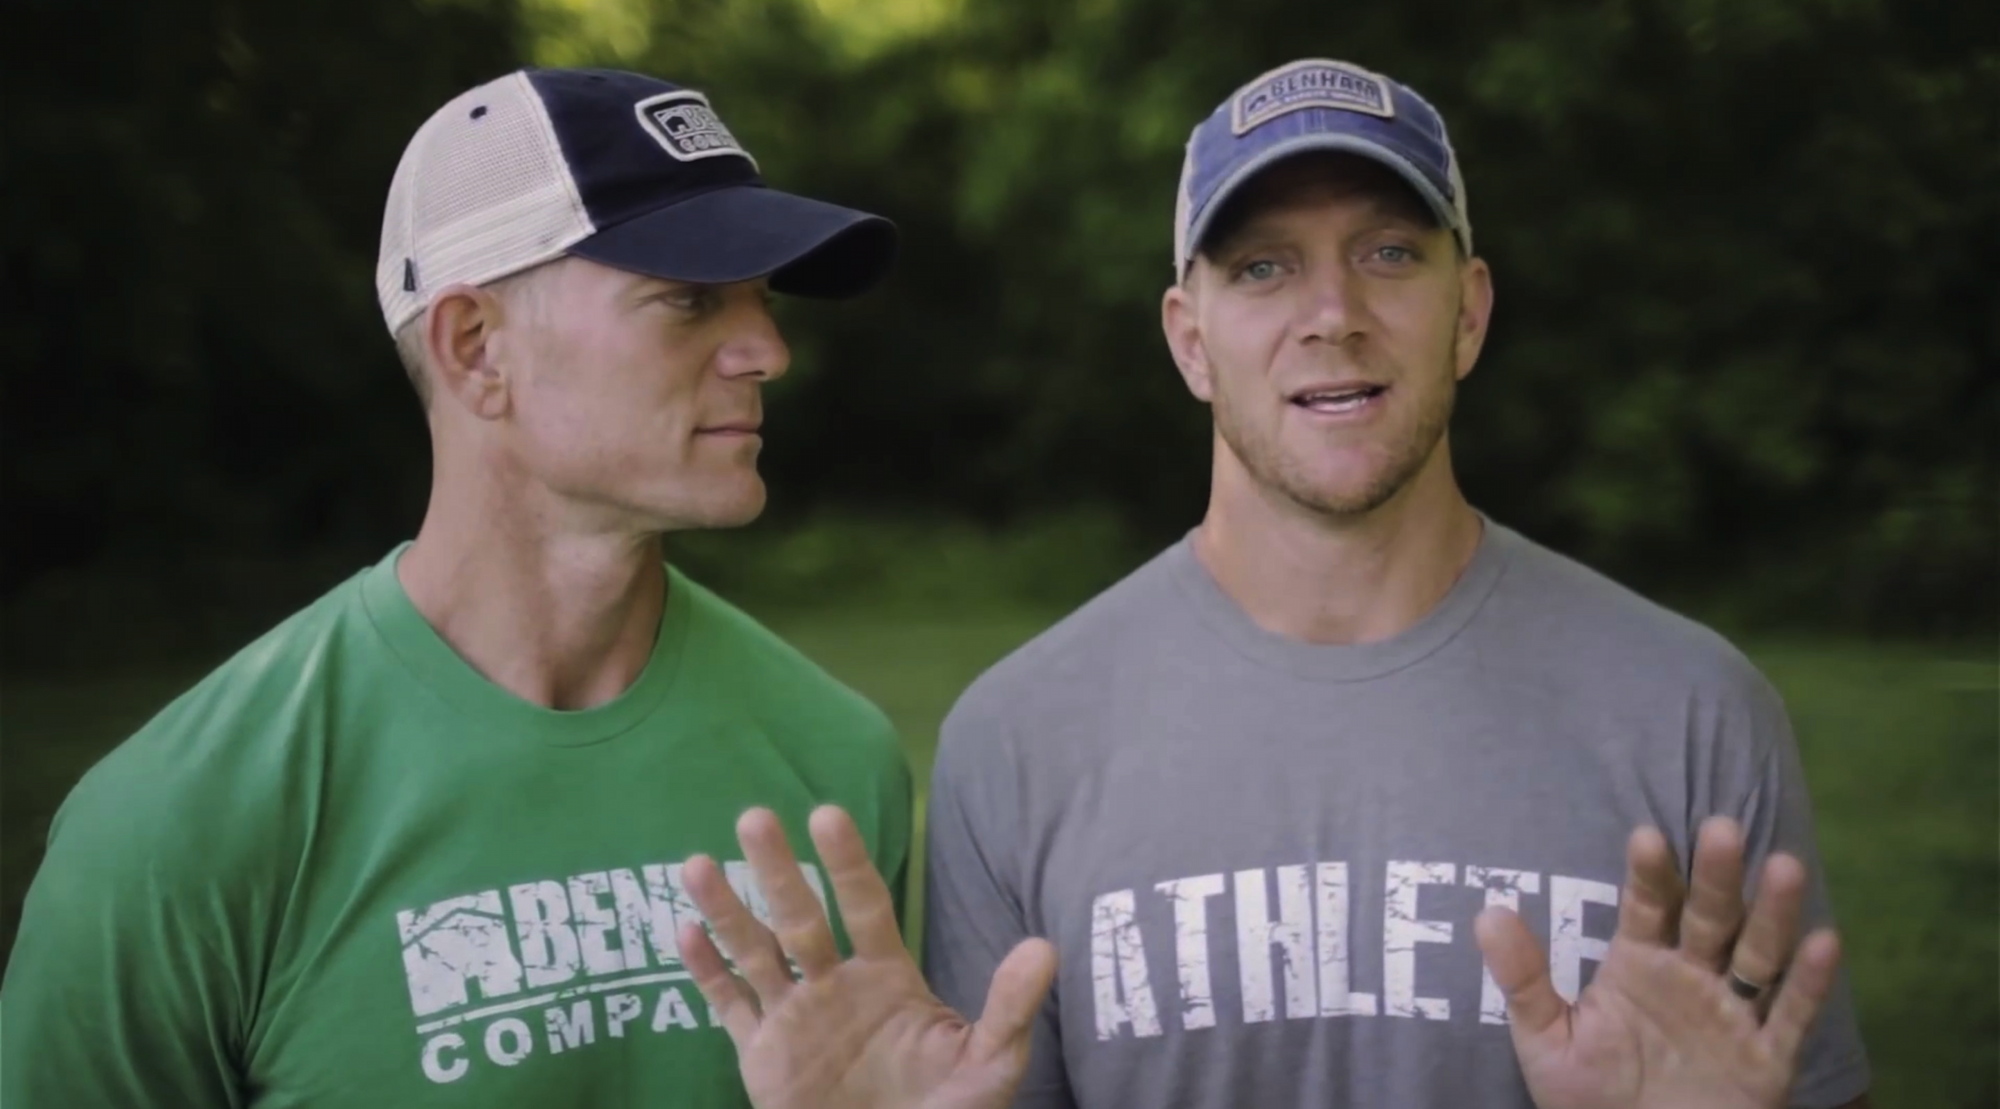 Benham Brothers Evil Wrong Gay Agenda Needs To Be Stopped Audio 